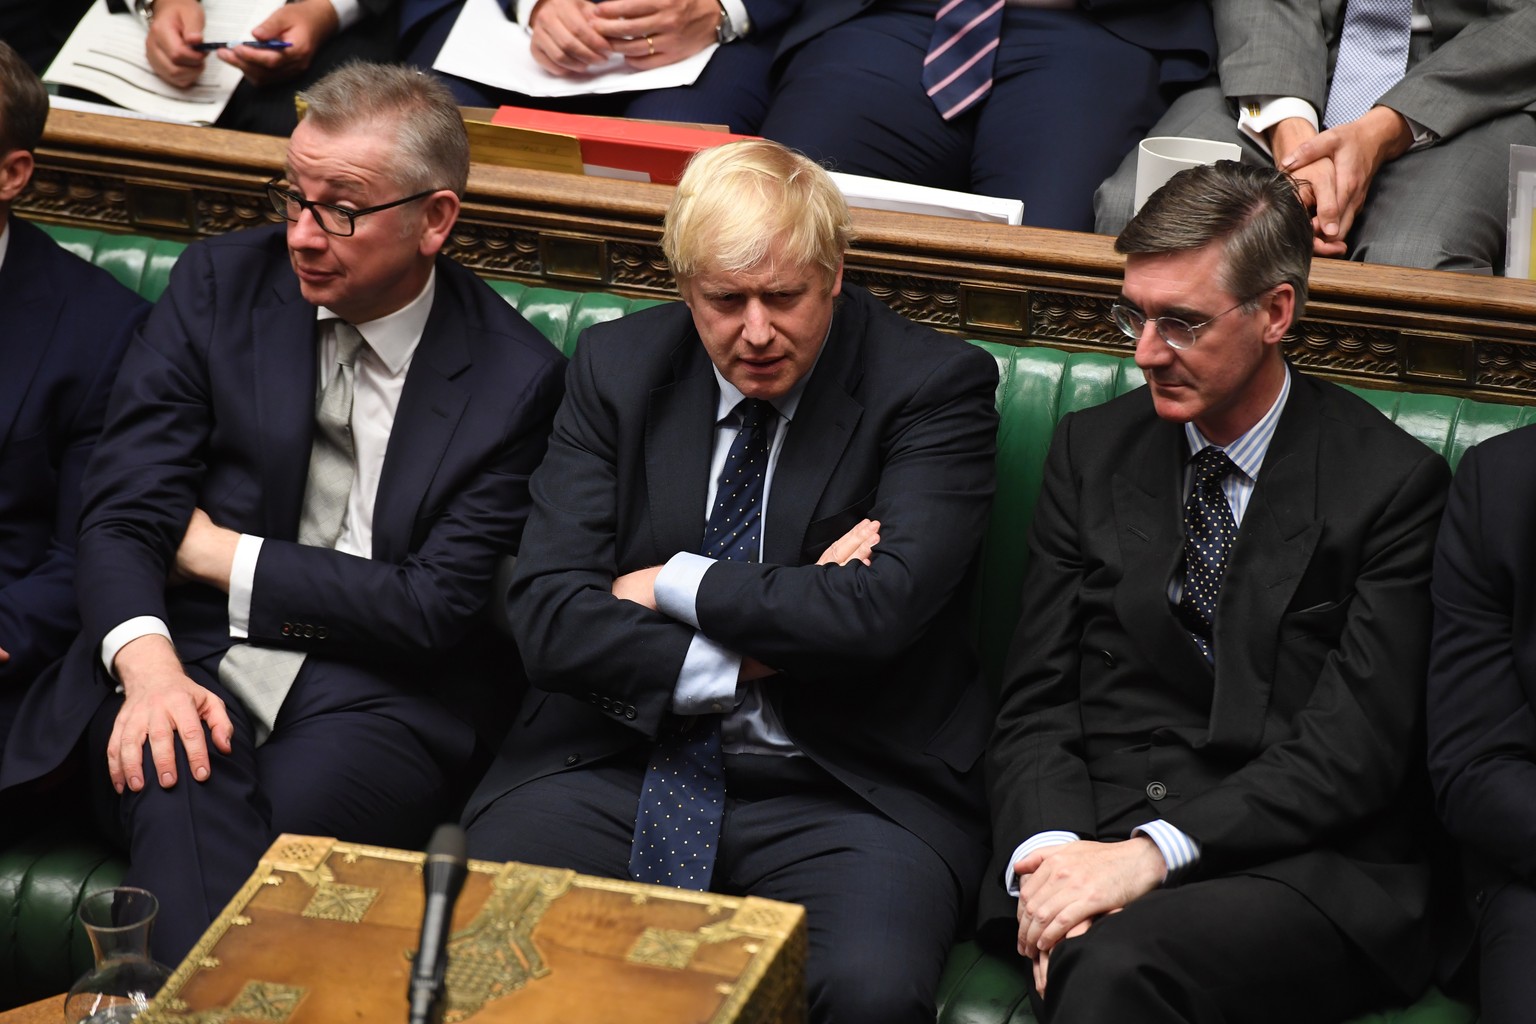 epa07815652 A handout photo made available by the UK Parliament shows British Prime Minister Boris Johnson attending a session in the House of Commons in London, Britain, 03 September 2019British MPs  ...